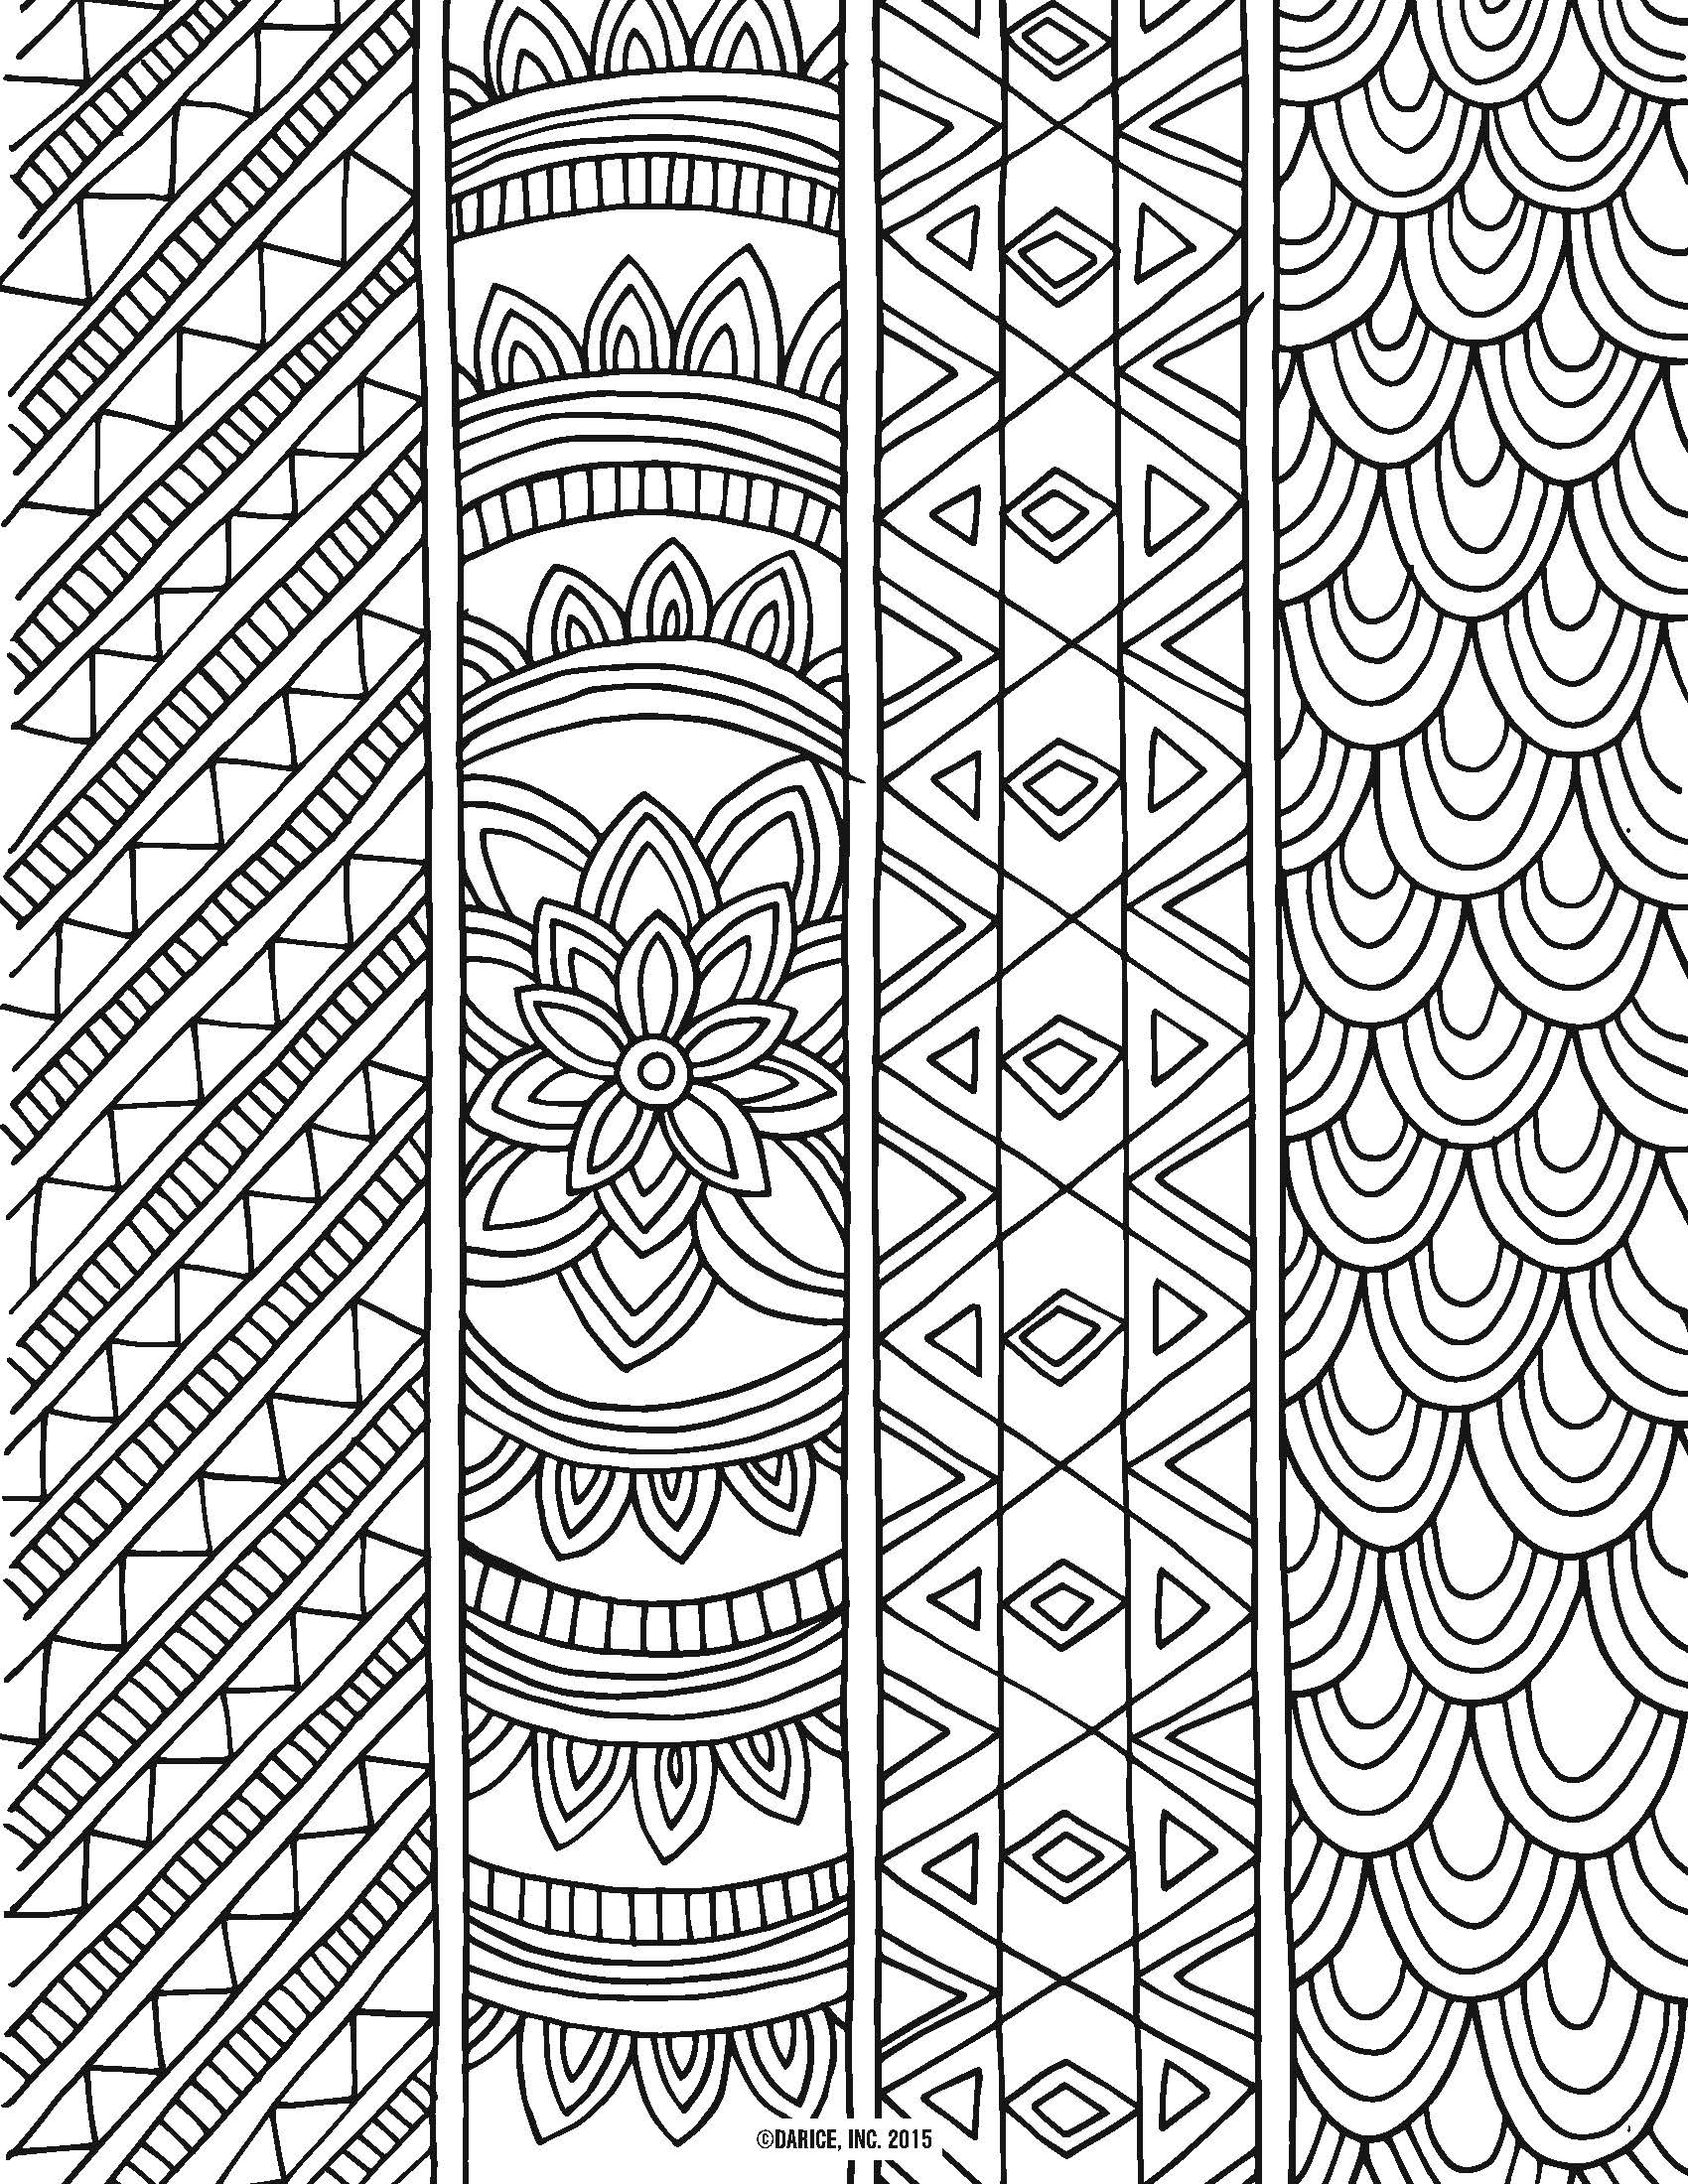 9 Free Printable Adult Coloring Pages | Pat Catan&amp;#039;s Blog - Free Printable Coloring Books For Adults